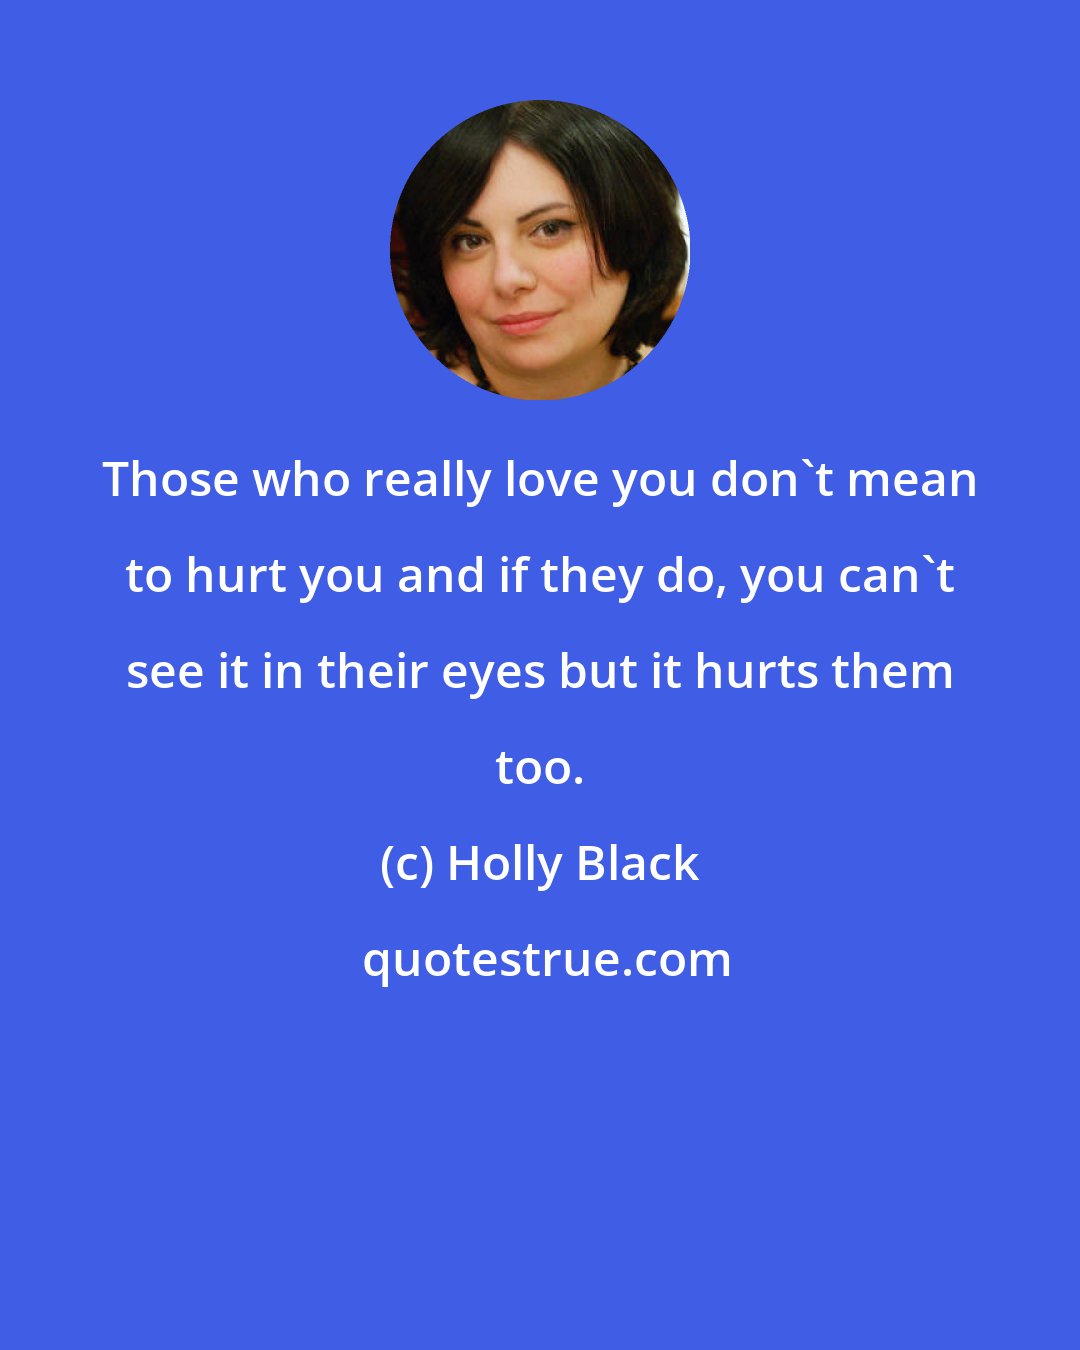 Holly Black: Those who really love you don't mean to hurt you and if they do, you can't see it in their eyes but it hurts them too.